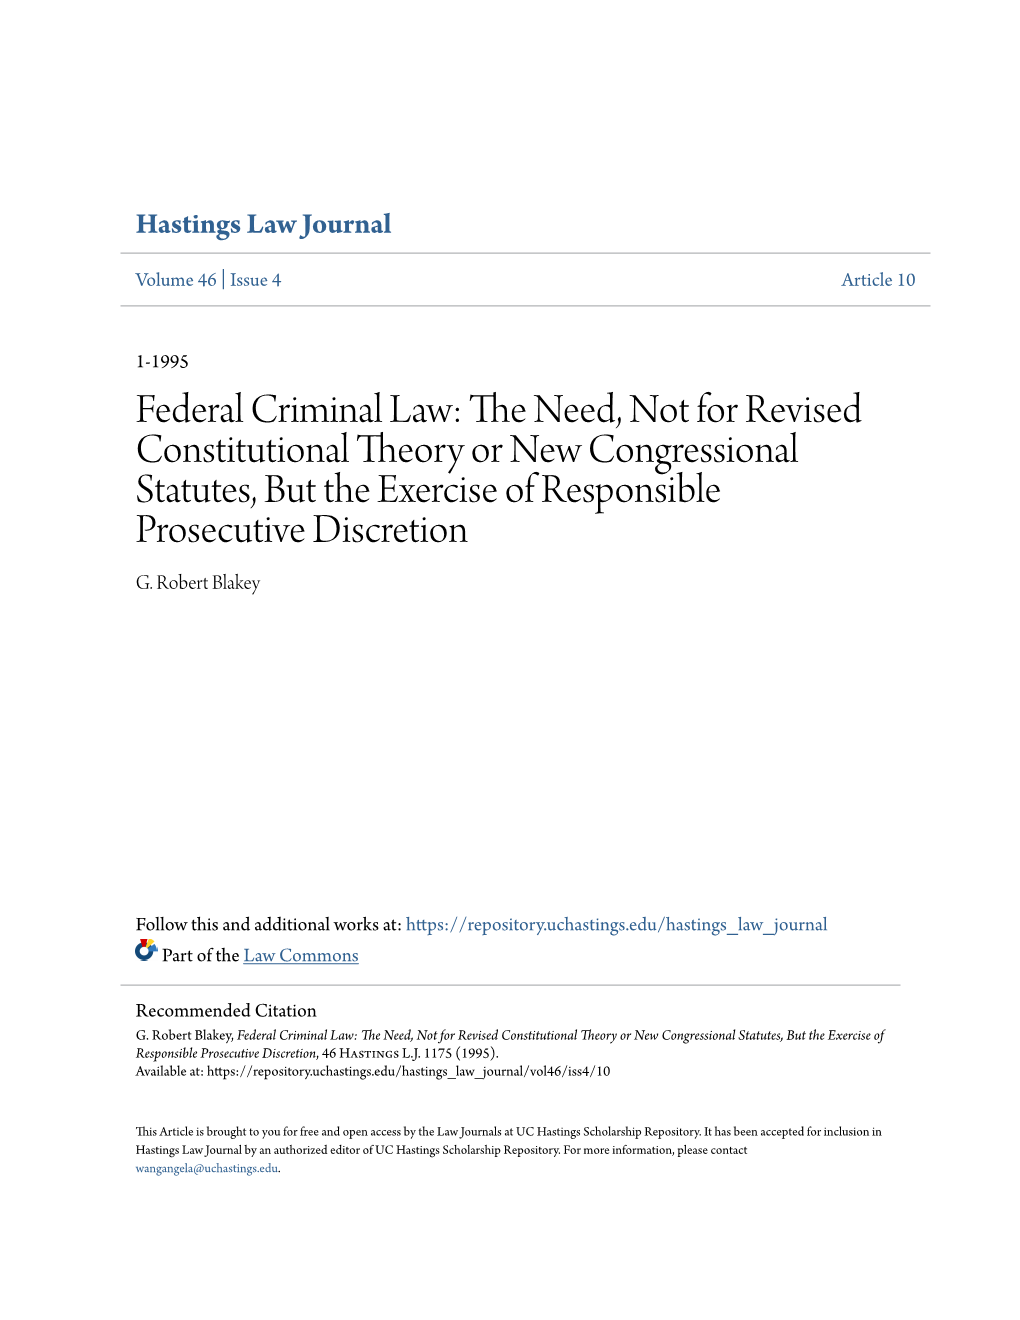 Federal Criminal Law: the Eedn , Not for Revised Constitutional Theory Or New Congressional Statutes, but the Exercise of Responsible Prosecutive Discretion G